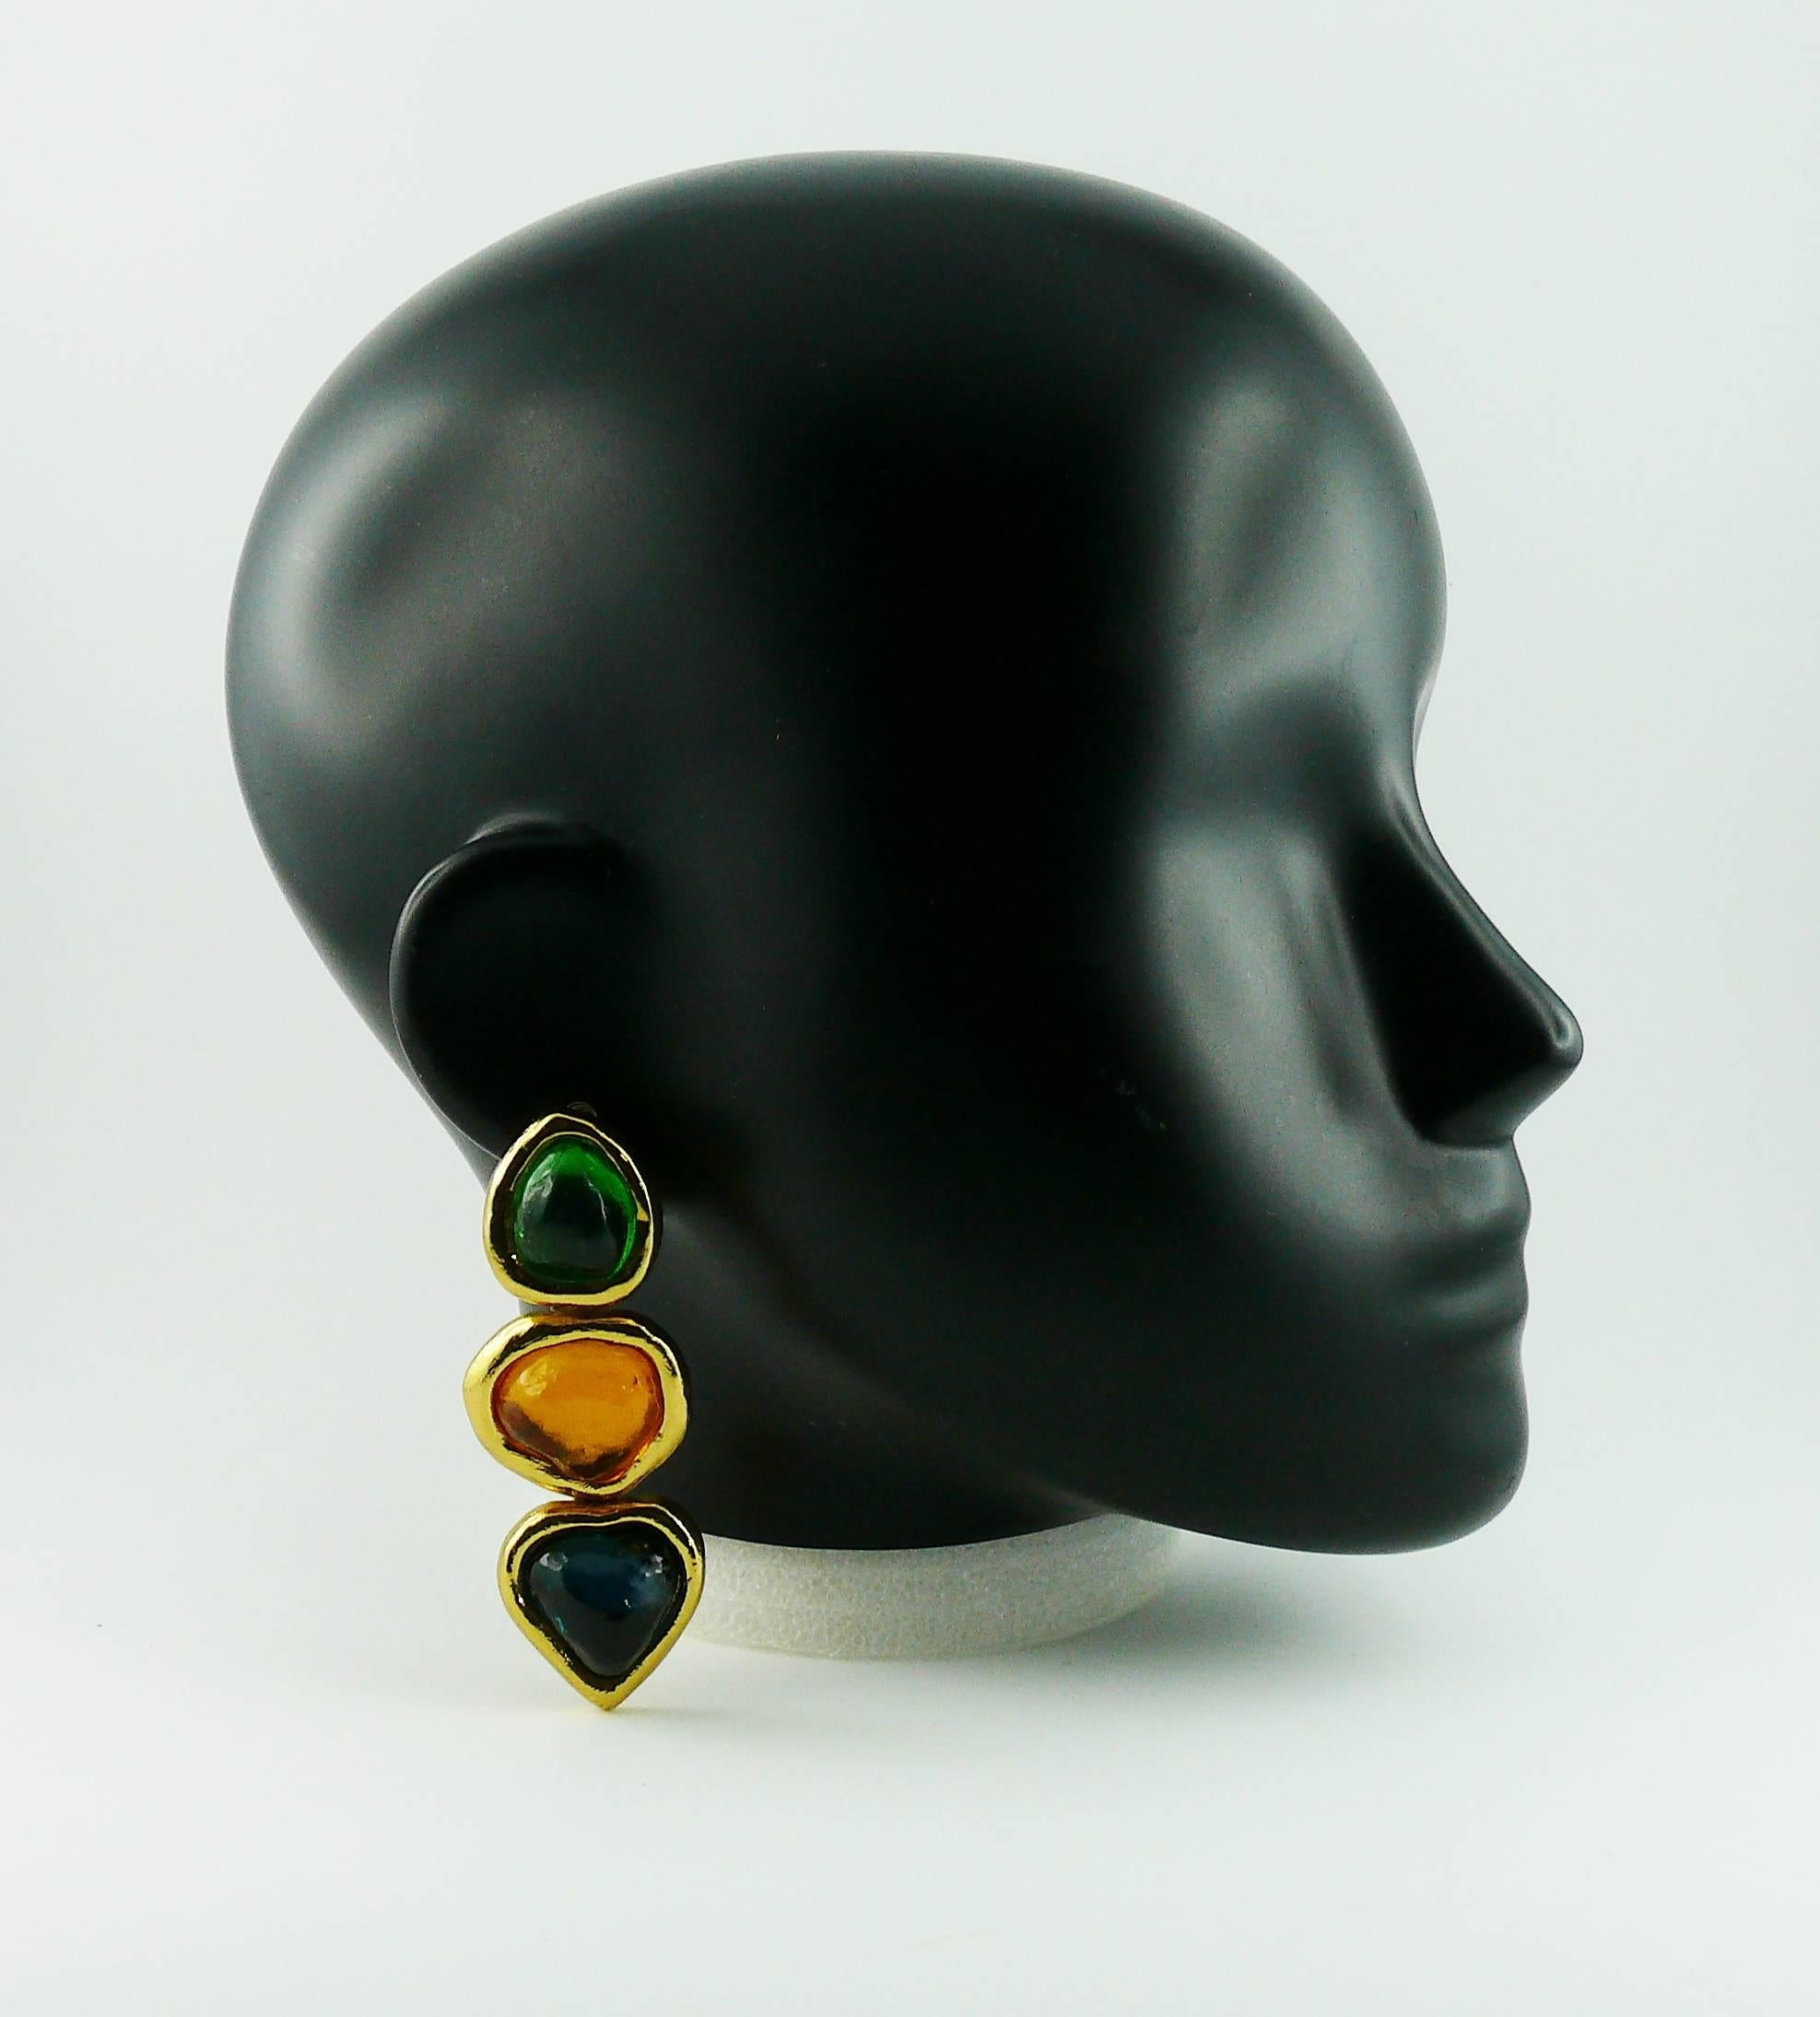 YVES SAINT LAURENT multicoloured resin dangling earrings (clip on).

These earrings feature 3 irregular shaped resin cabochon (green, orange and deep blue) in a gold toned setting.

Created by French parurier ROBERT GOOSSENS.

Embossed YSL Made in